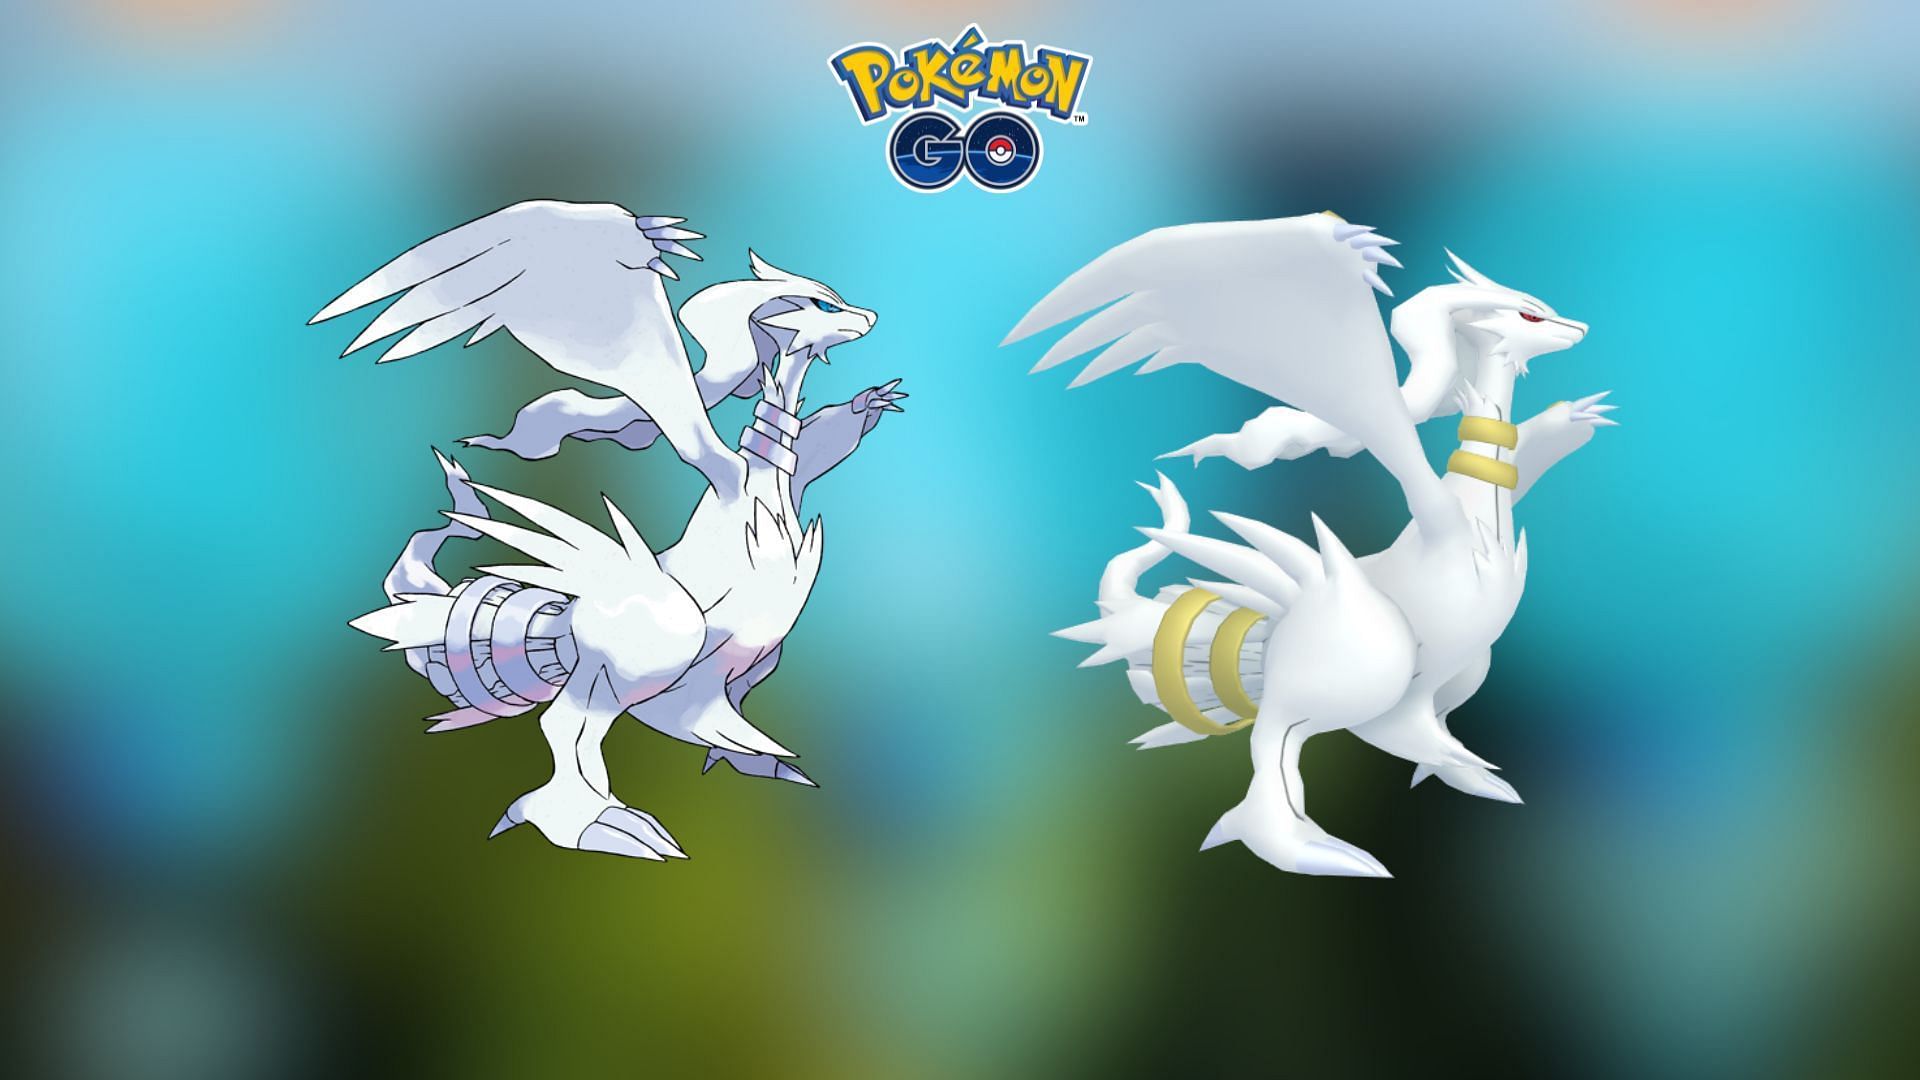 Pokemon Go Reshiram Raid Guide, best counters and how to catch a Shiny